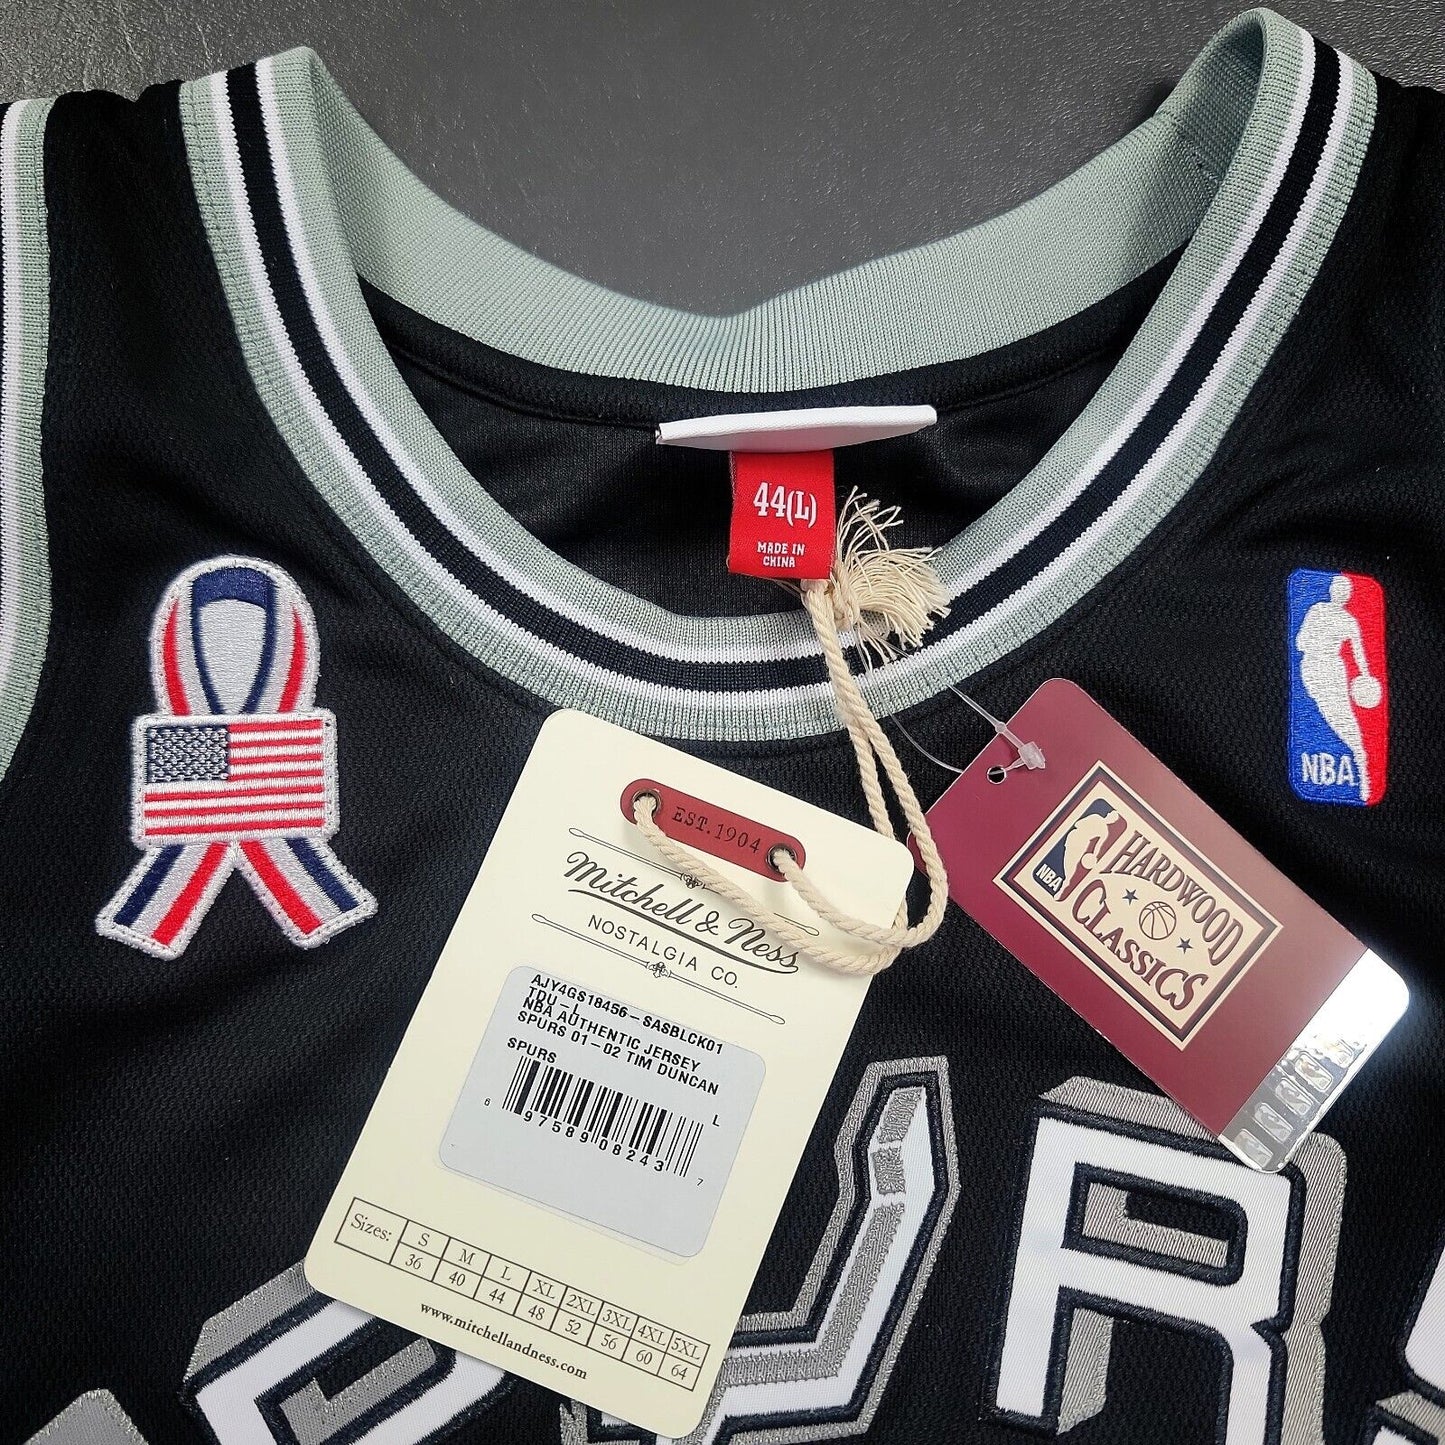 100% Authentic Tim Duncan Mitchell Ness 01 02 Spurs Jersey Size 44 L Mens